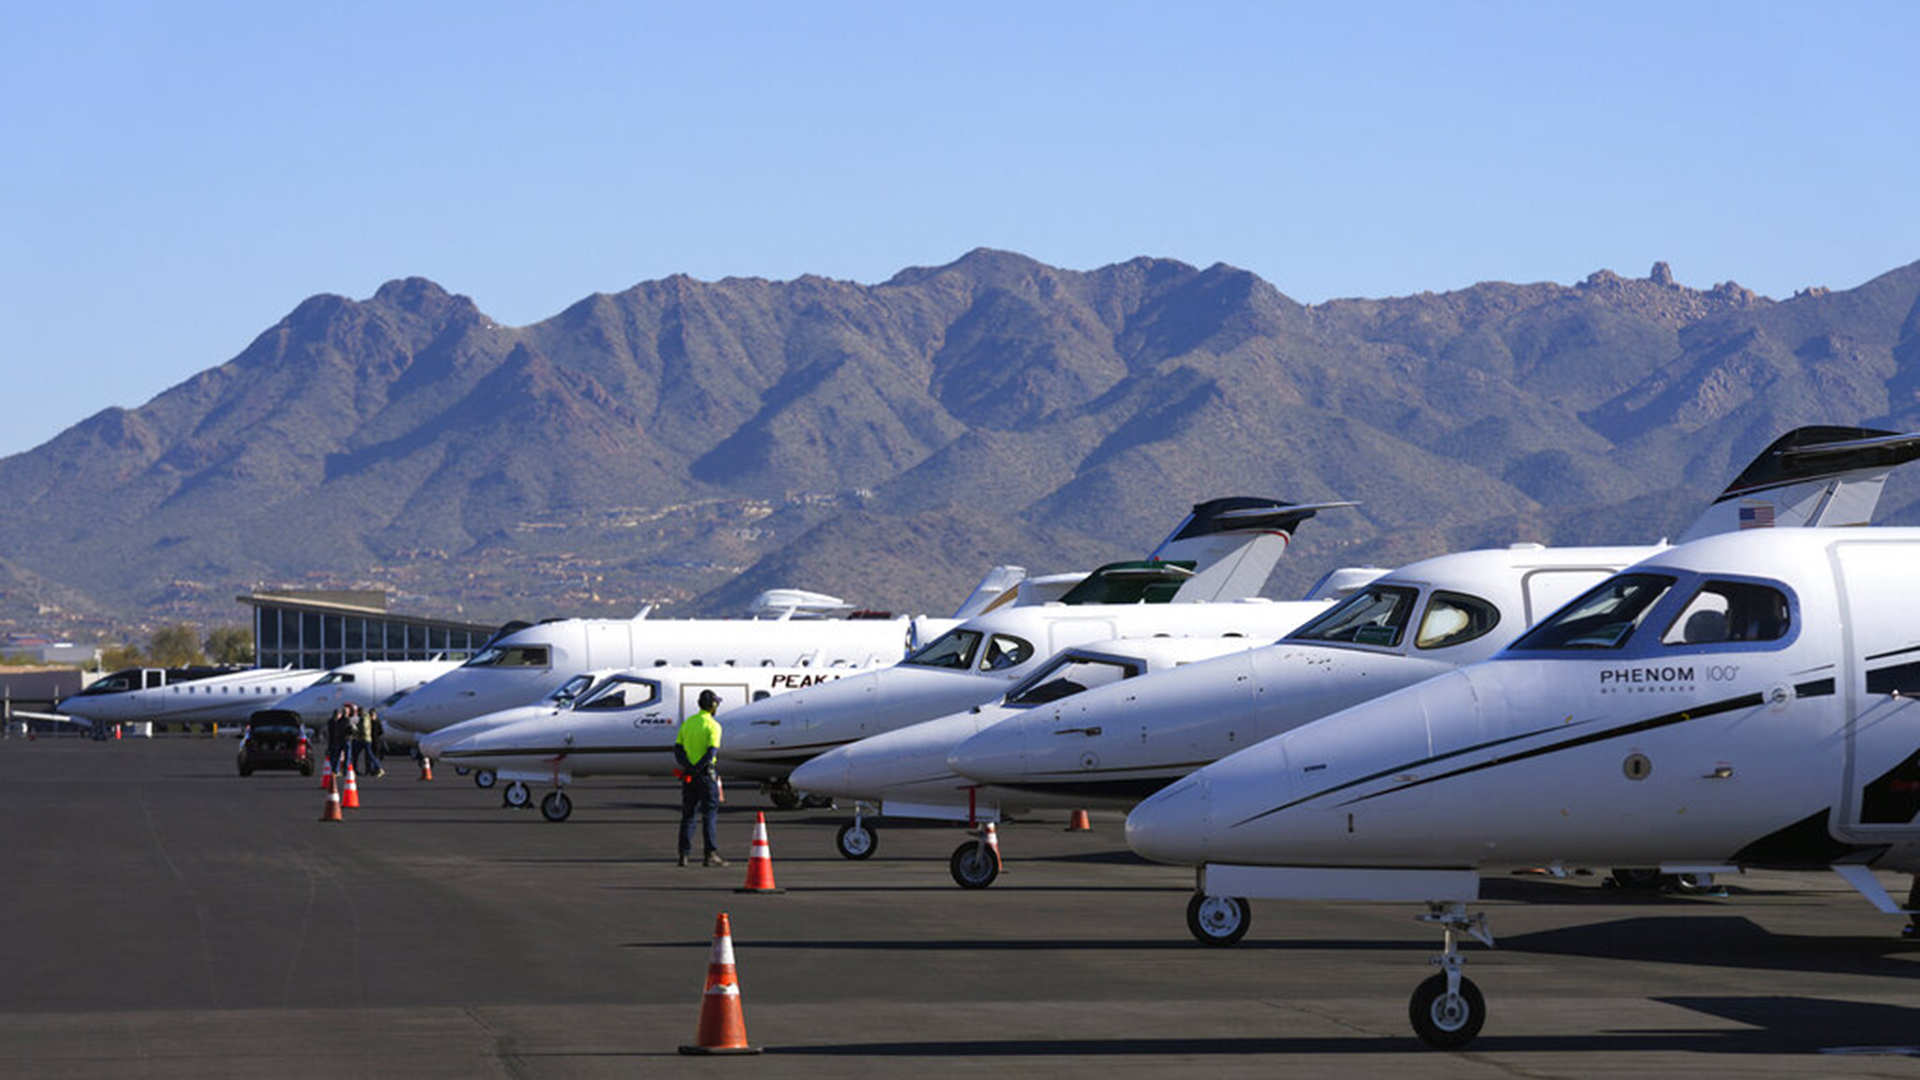 A Scottsdale Airport staffer waits on a private jet, as the airport gears up for the expected dramactic increase in private jet traffic, leading up to the NFL Super Bowl LVII football game